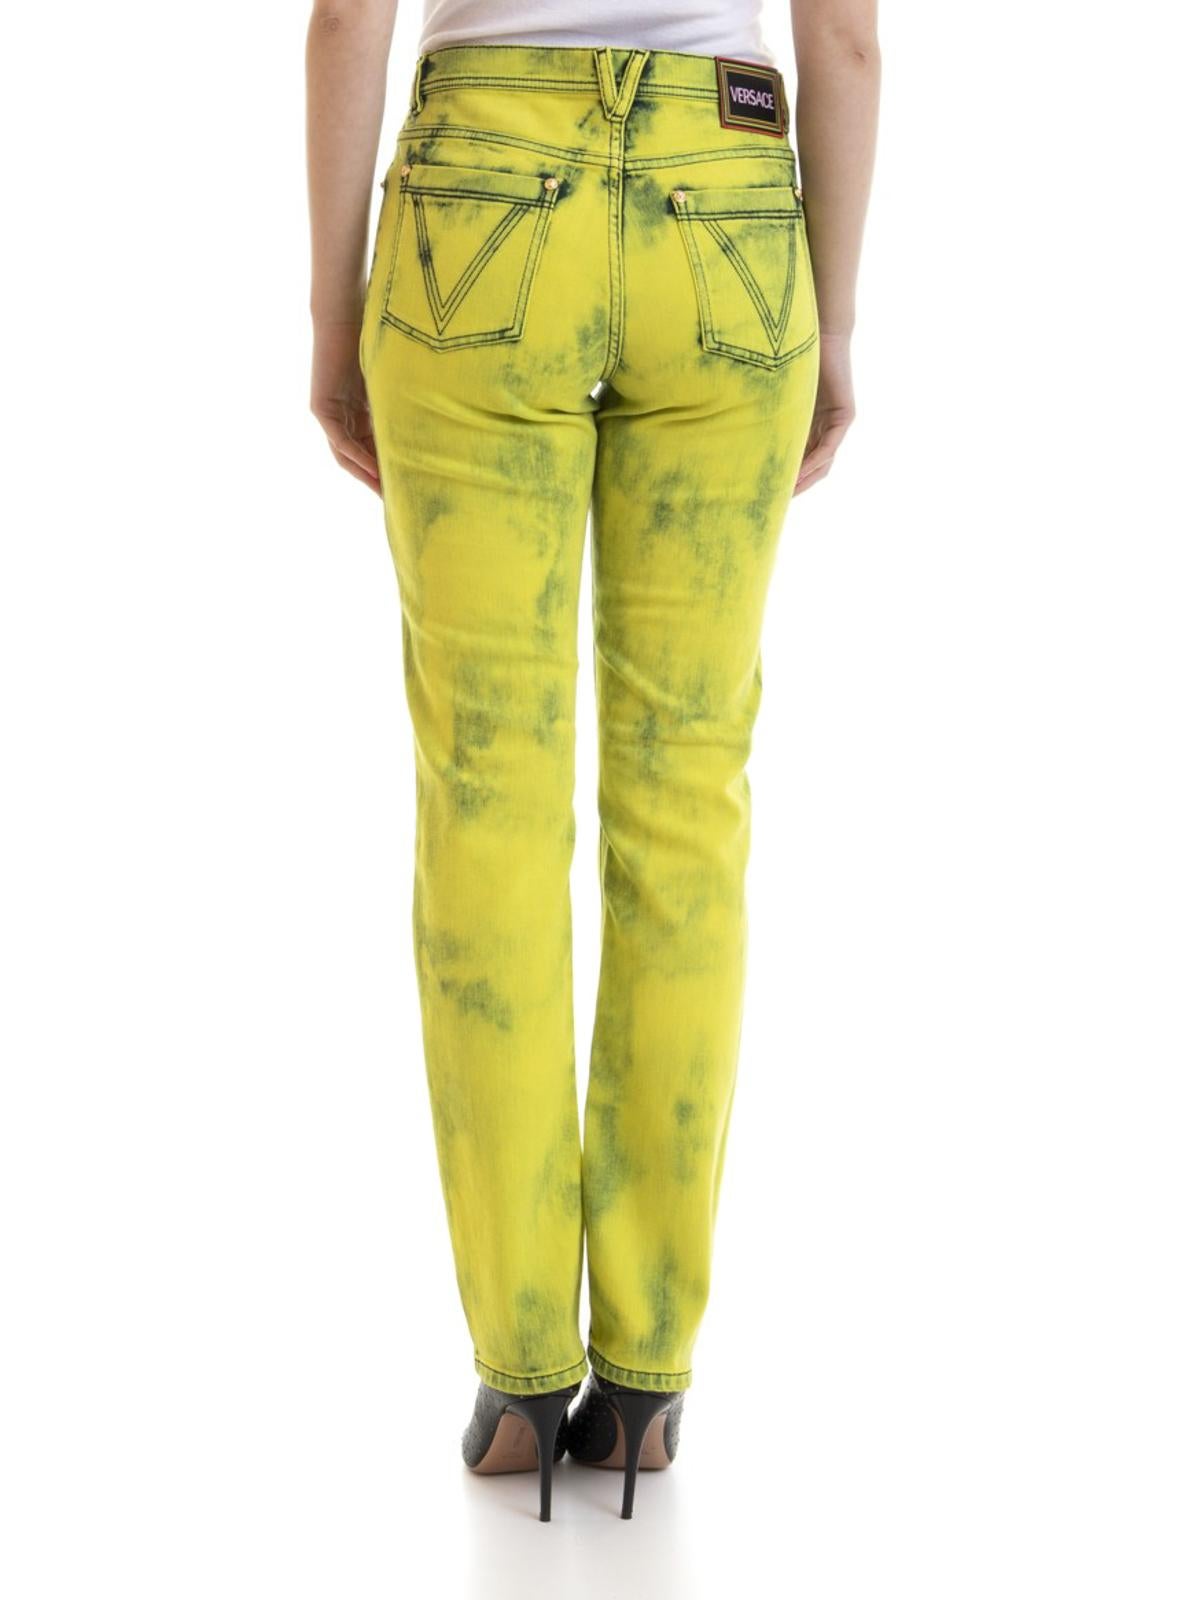 Versace Yellow Acid Wash Denim Skinny Jeans with Logo Label Size 27 In New Condition For Sale In Paradise Island, BS